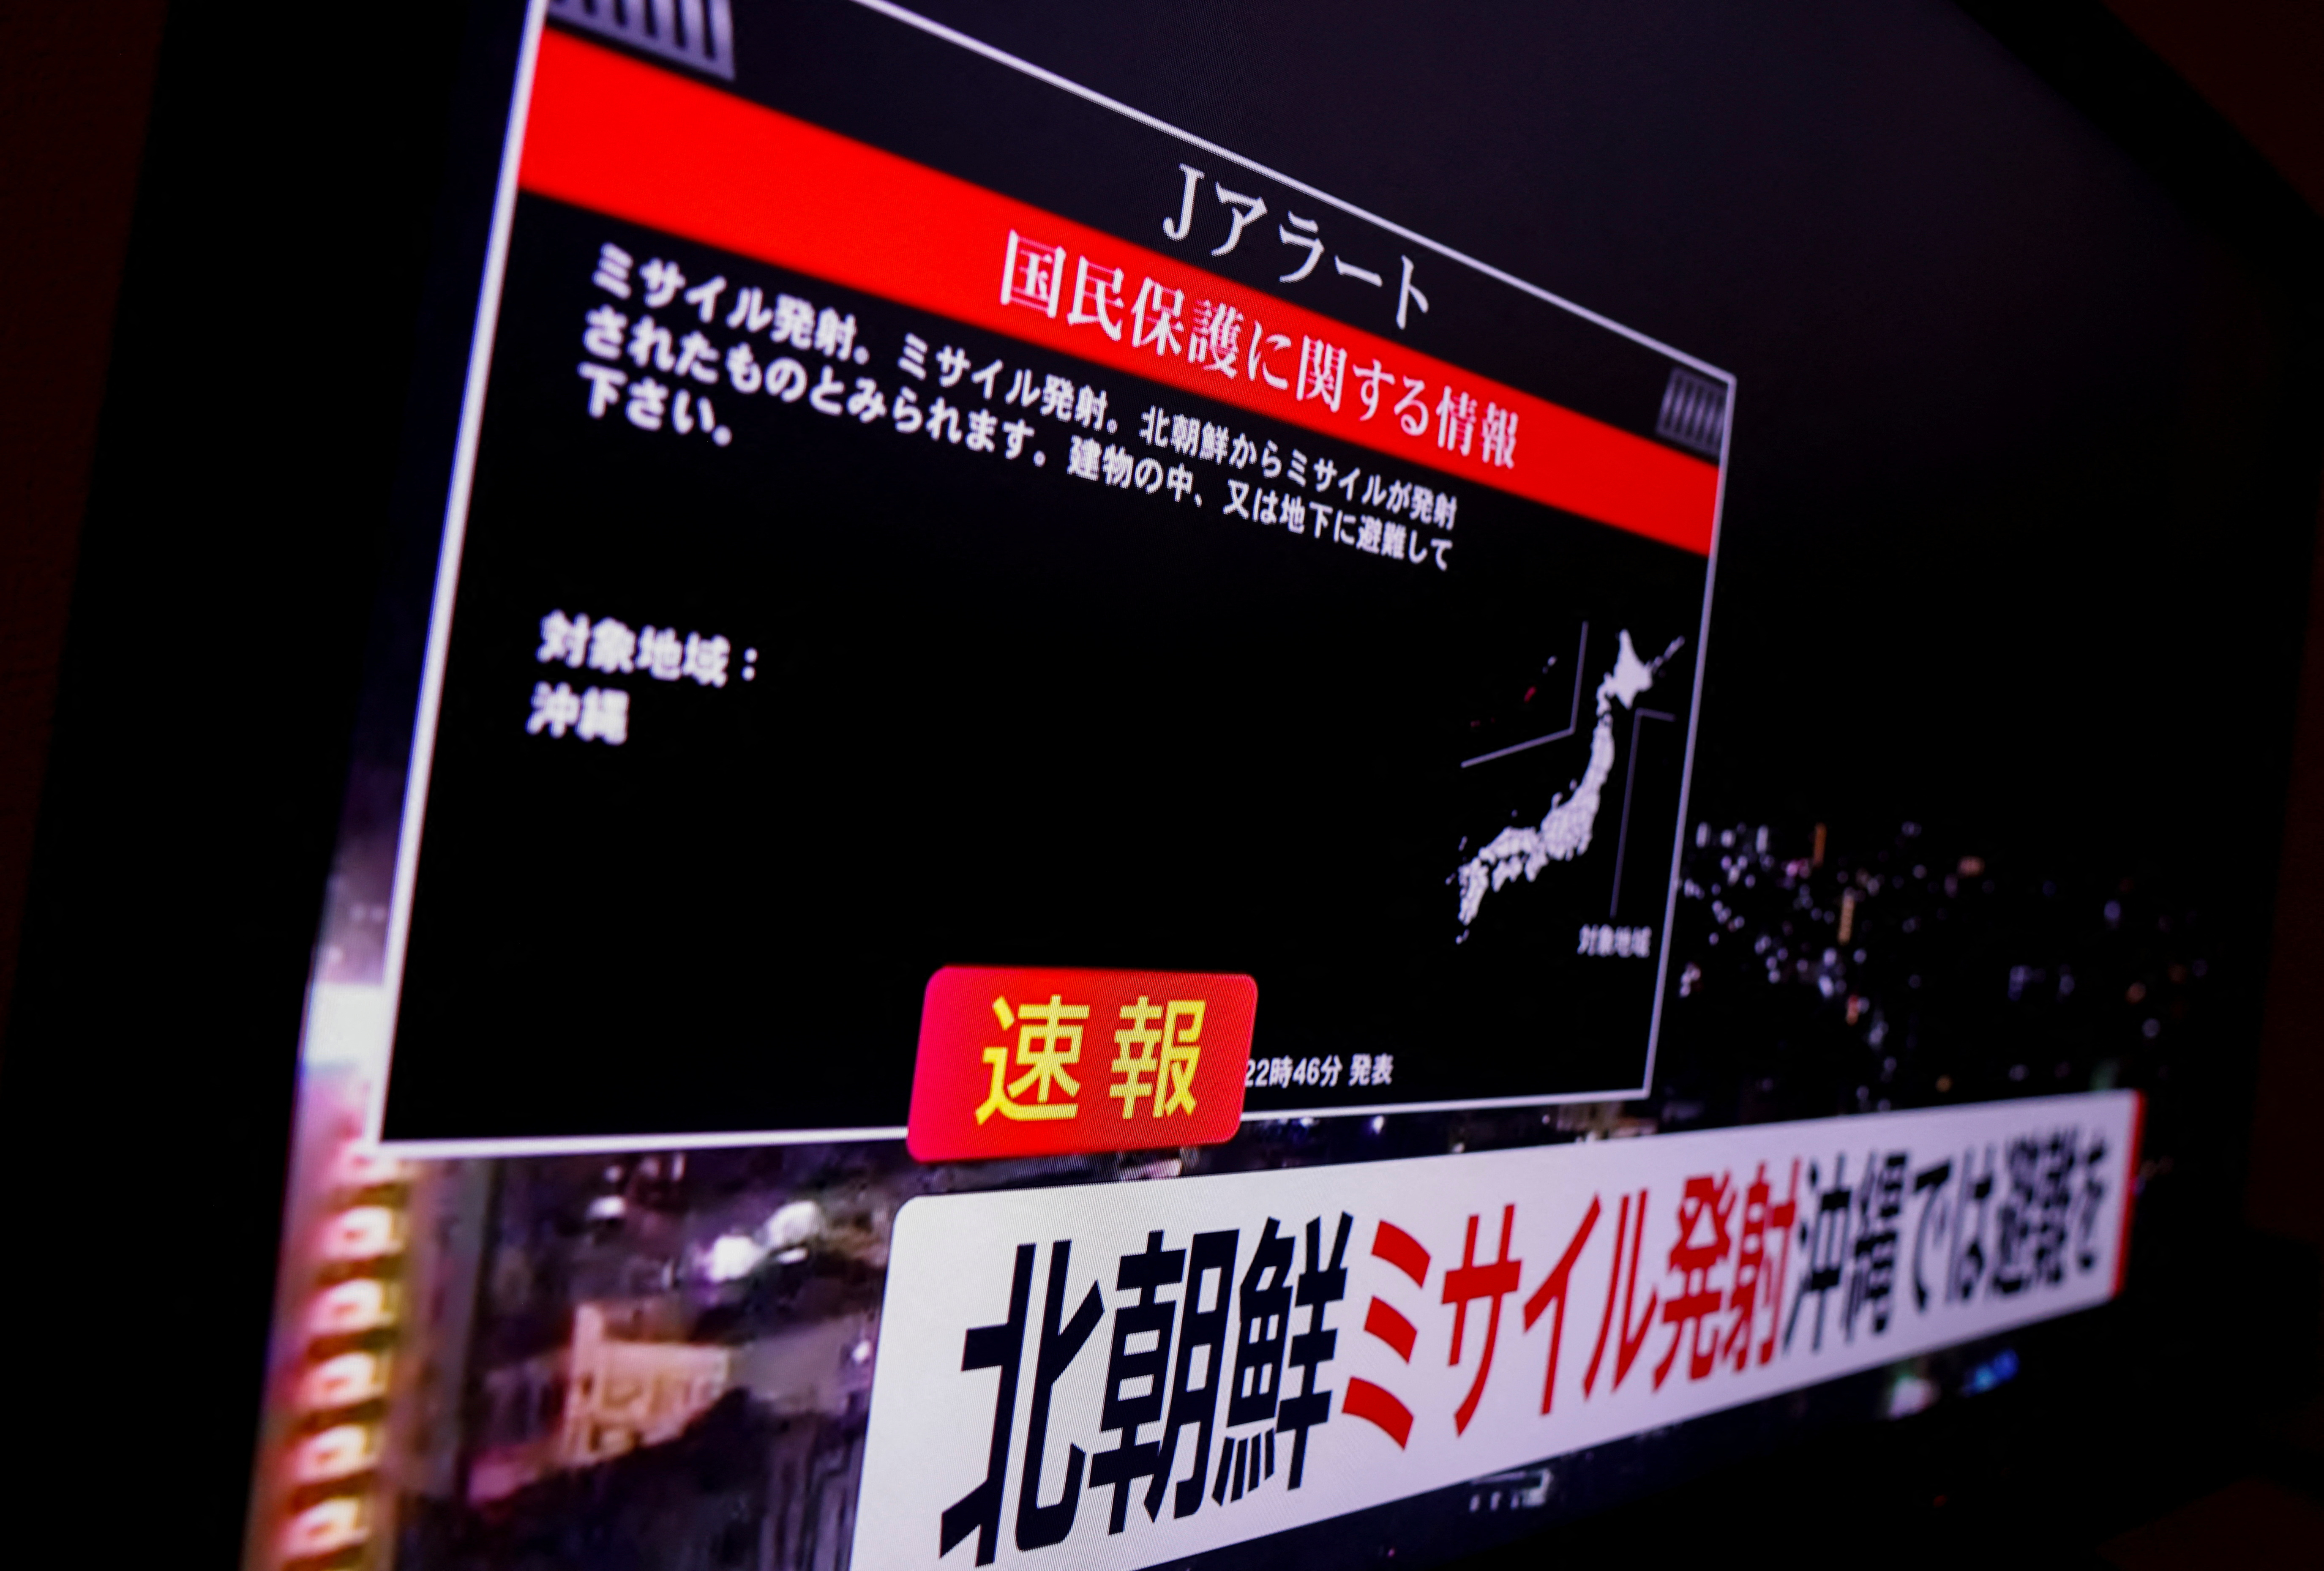 A TV screen displays a warning message called "J-alert" after the Japanese government issued an emergency warning, saying a missile had been launched from North Korea, in Tokyo